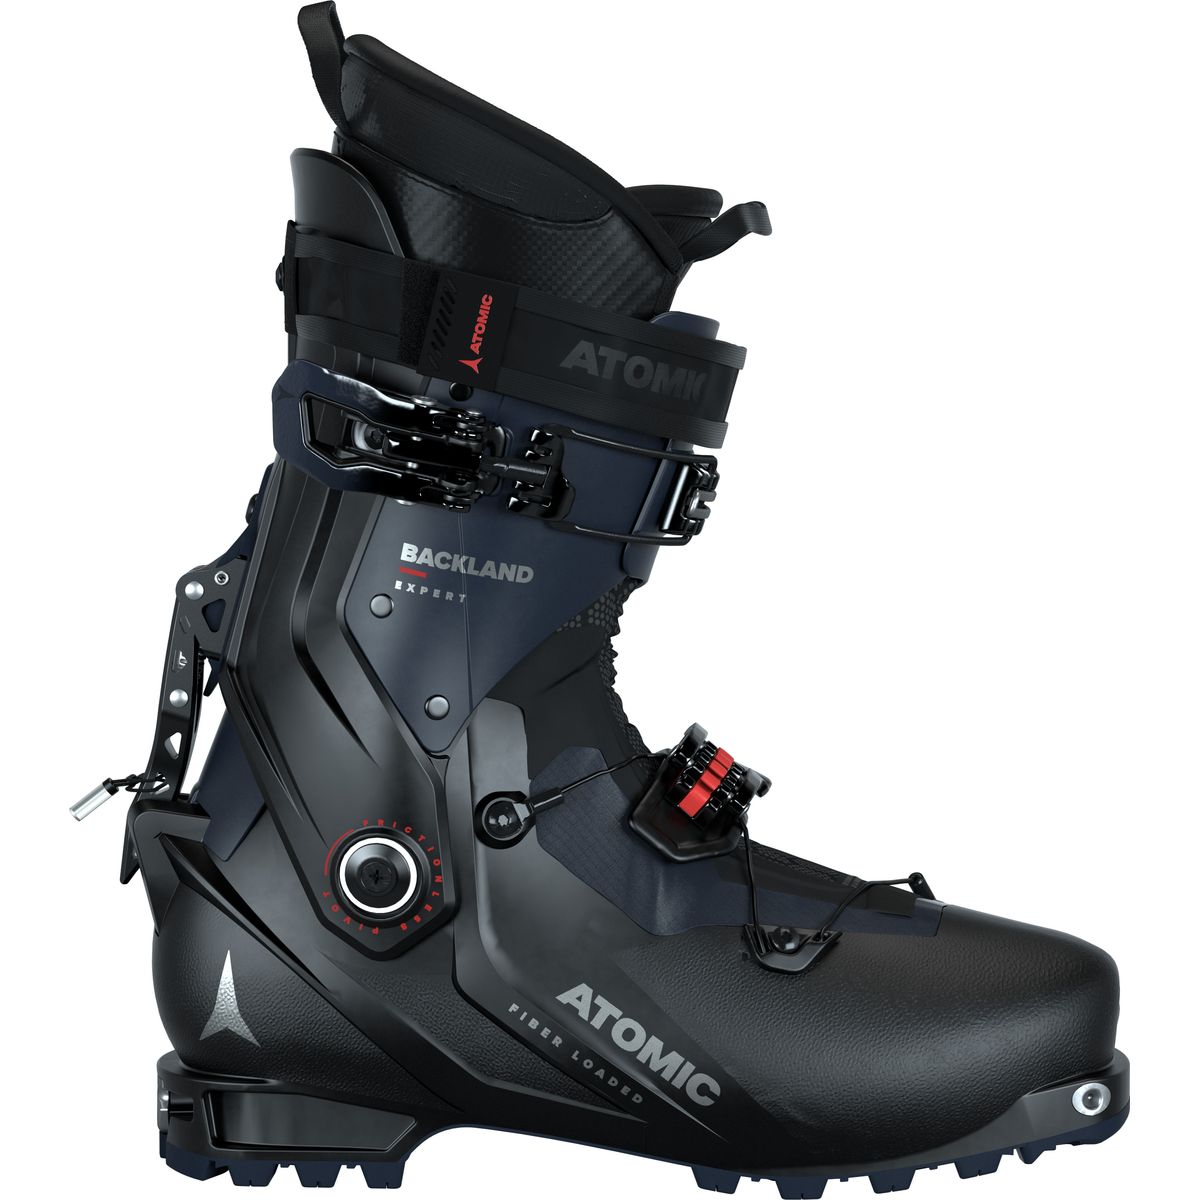 Atomic Backland Expert Skistiefel